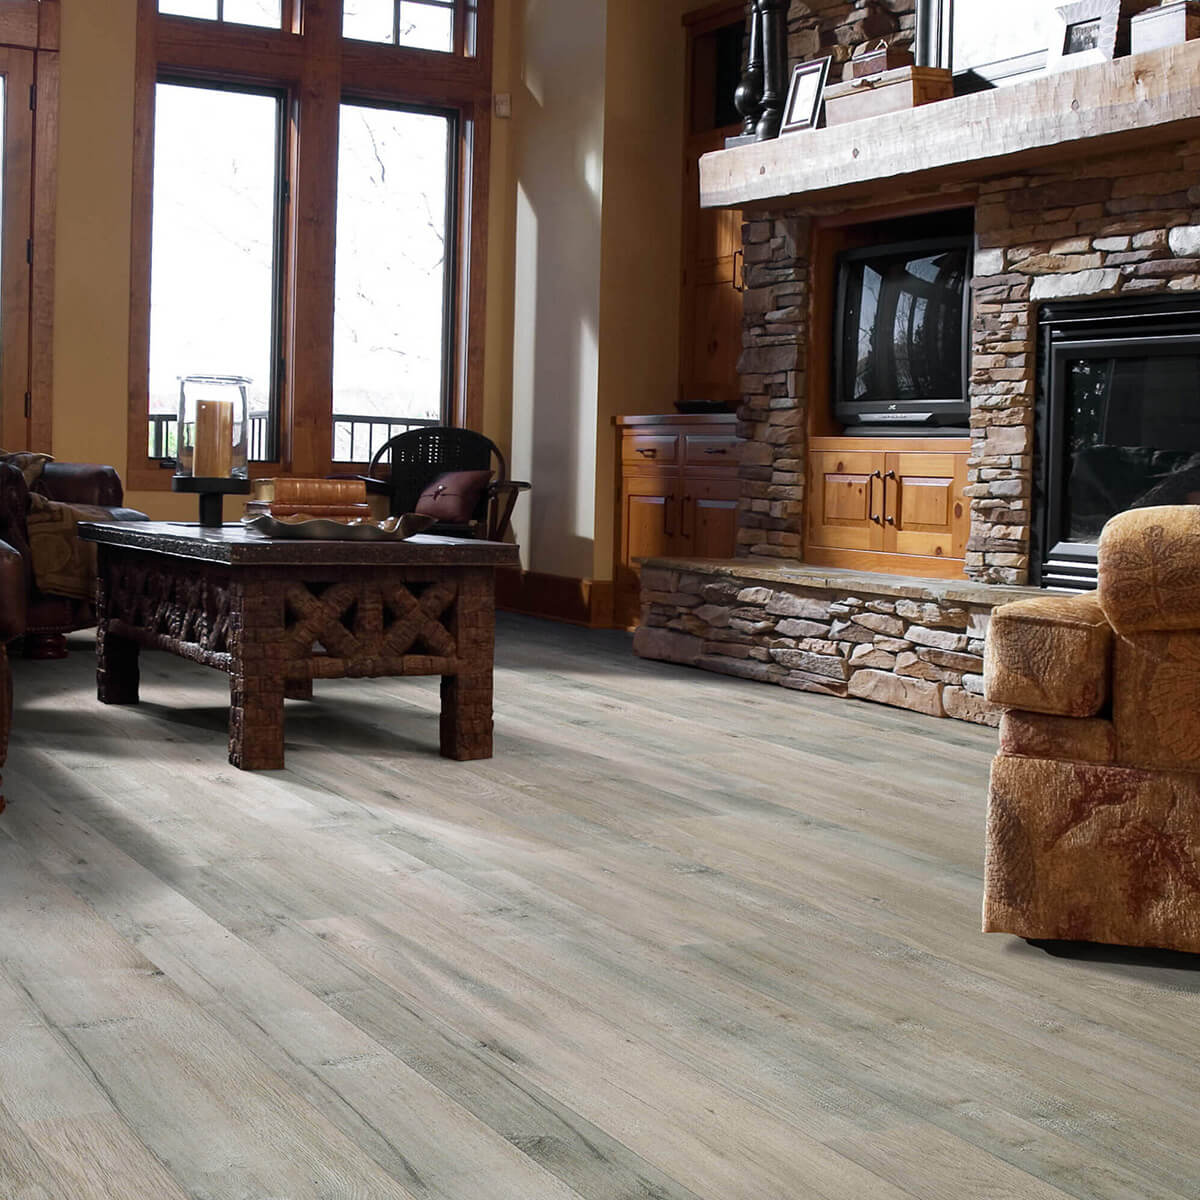 Laminate flooring | Rugs Rolls and More